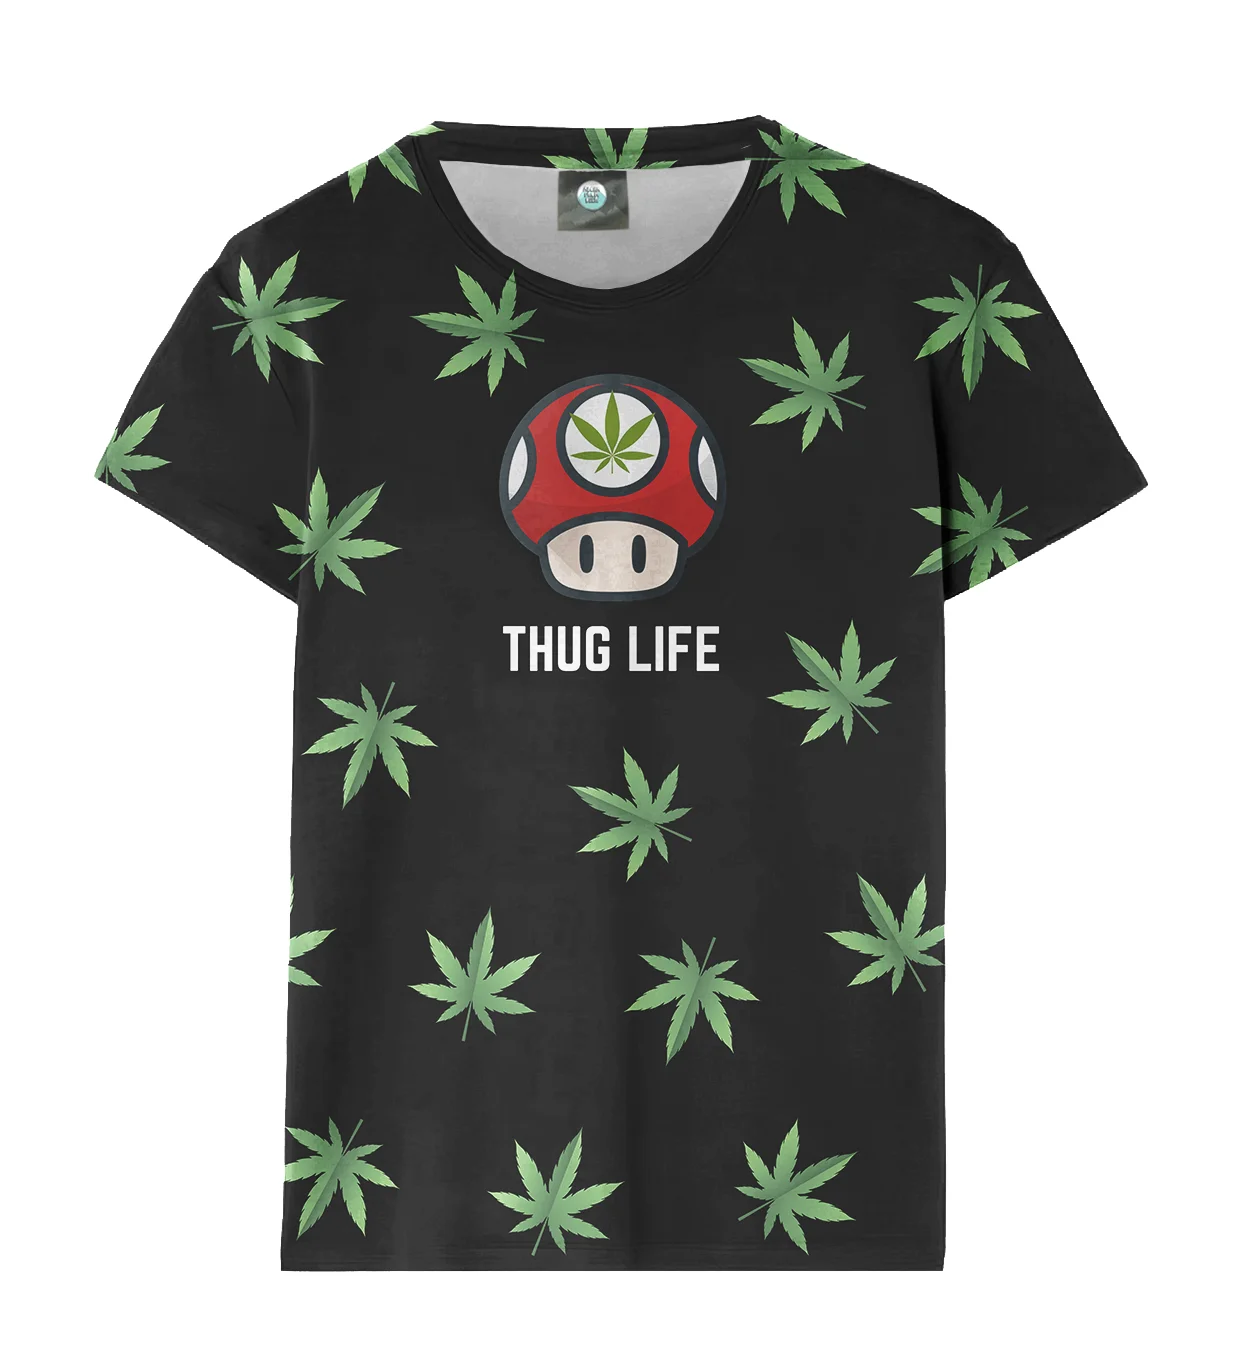 Thug Life womens t-shirt - Official Store